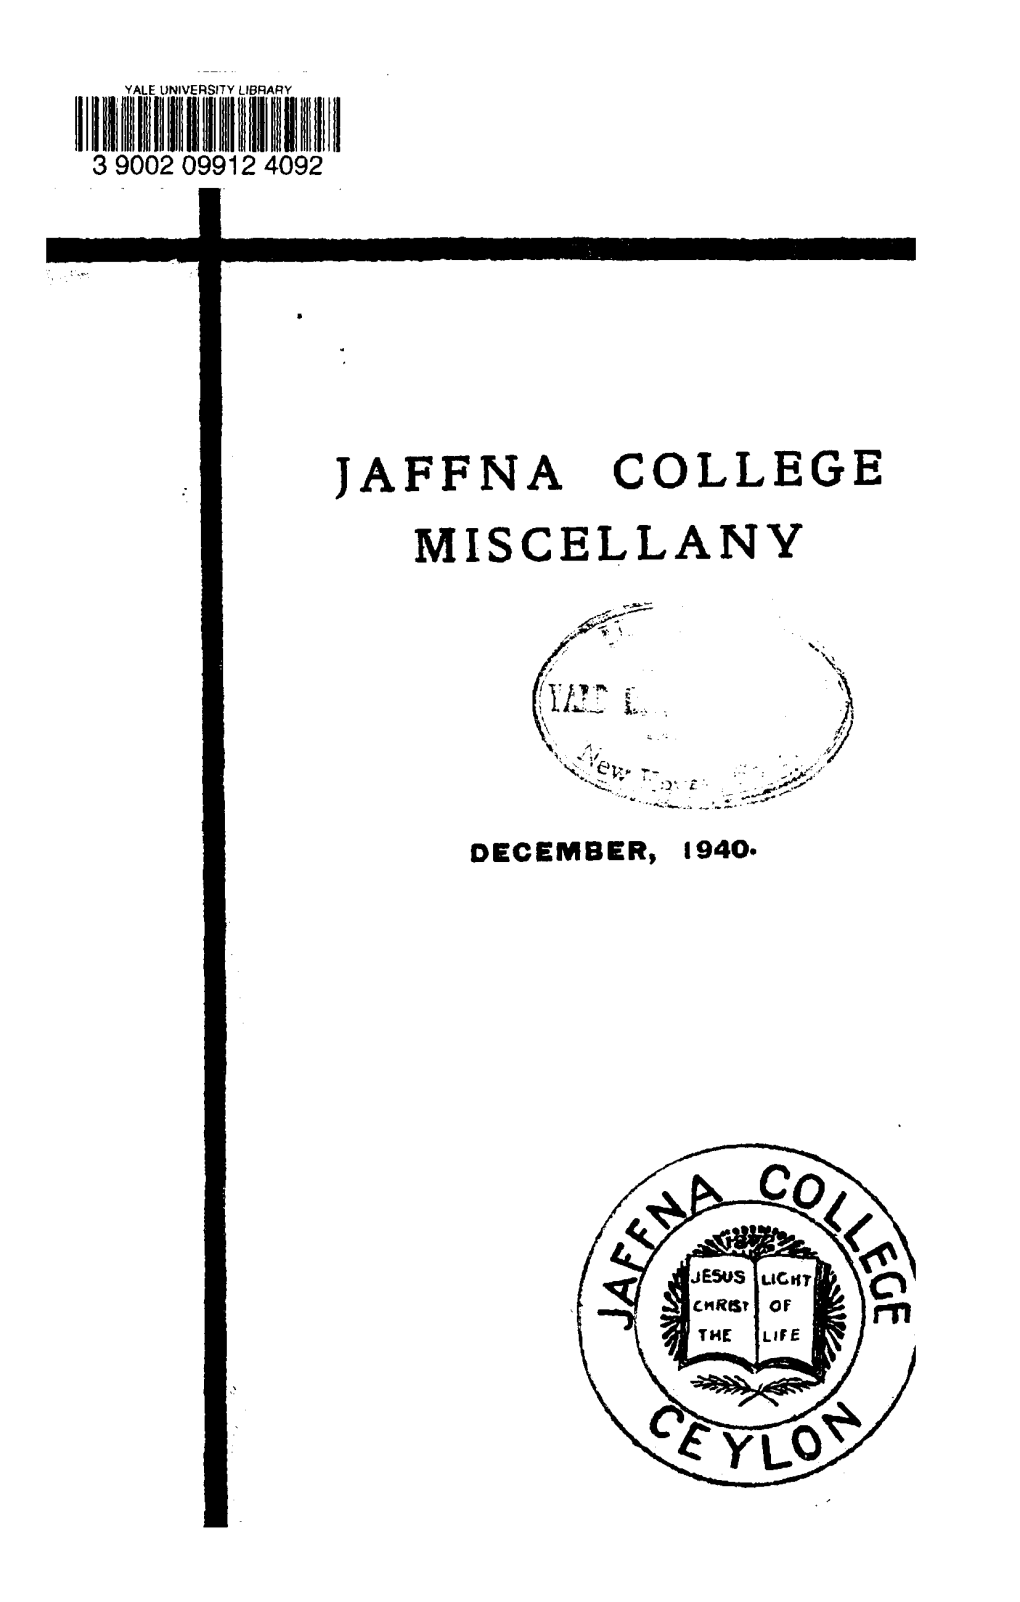 Jaffna College Miscellany